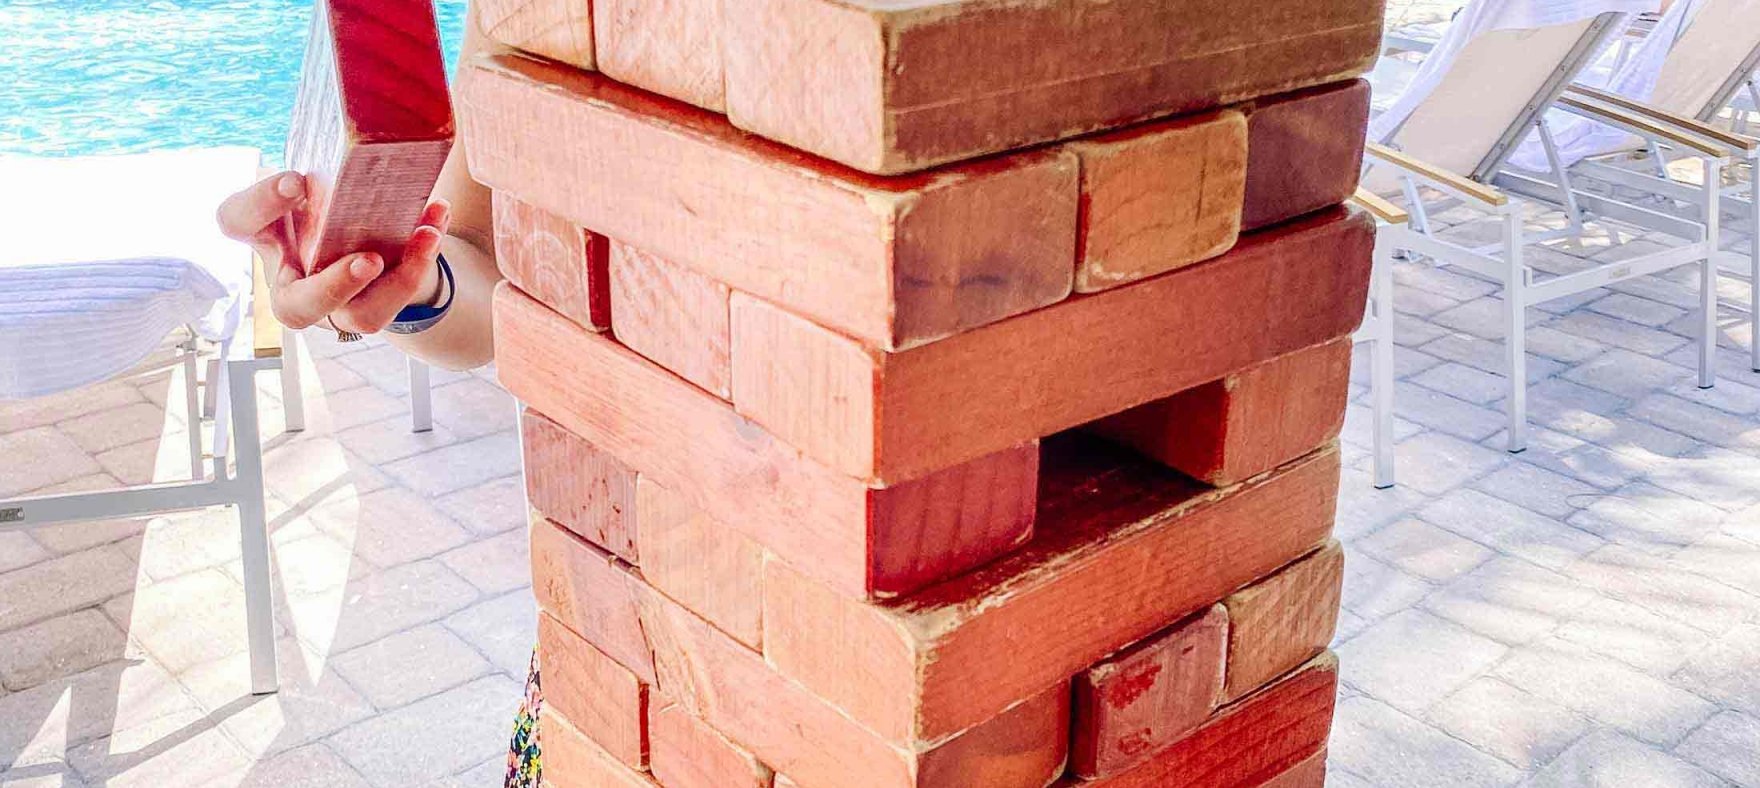 A close up of the mini brick structure with a woman holding a brick in the back